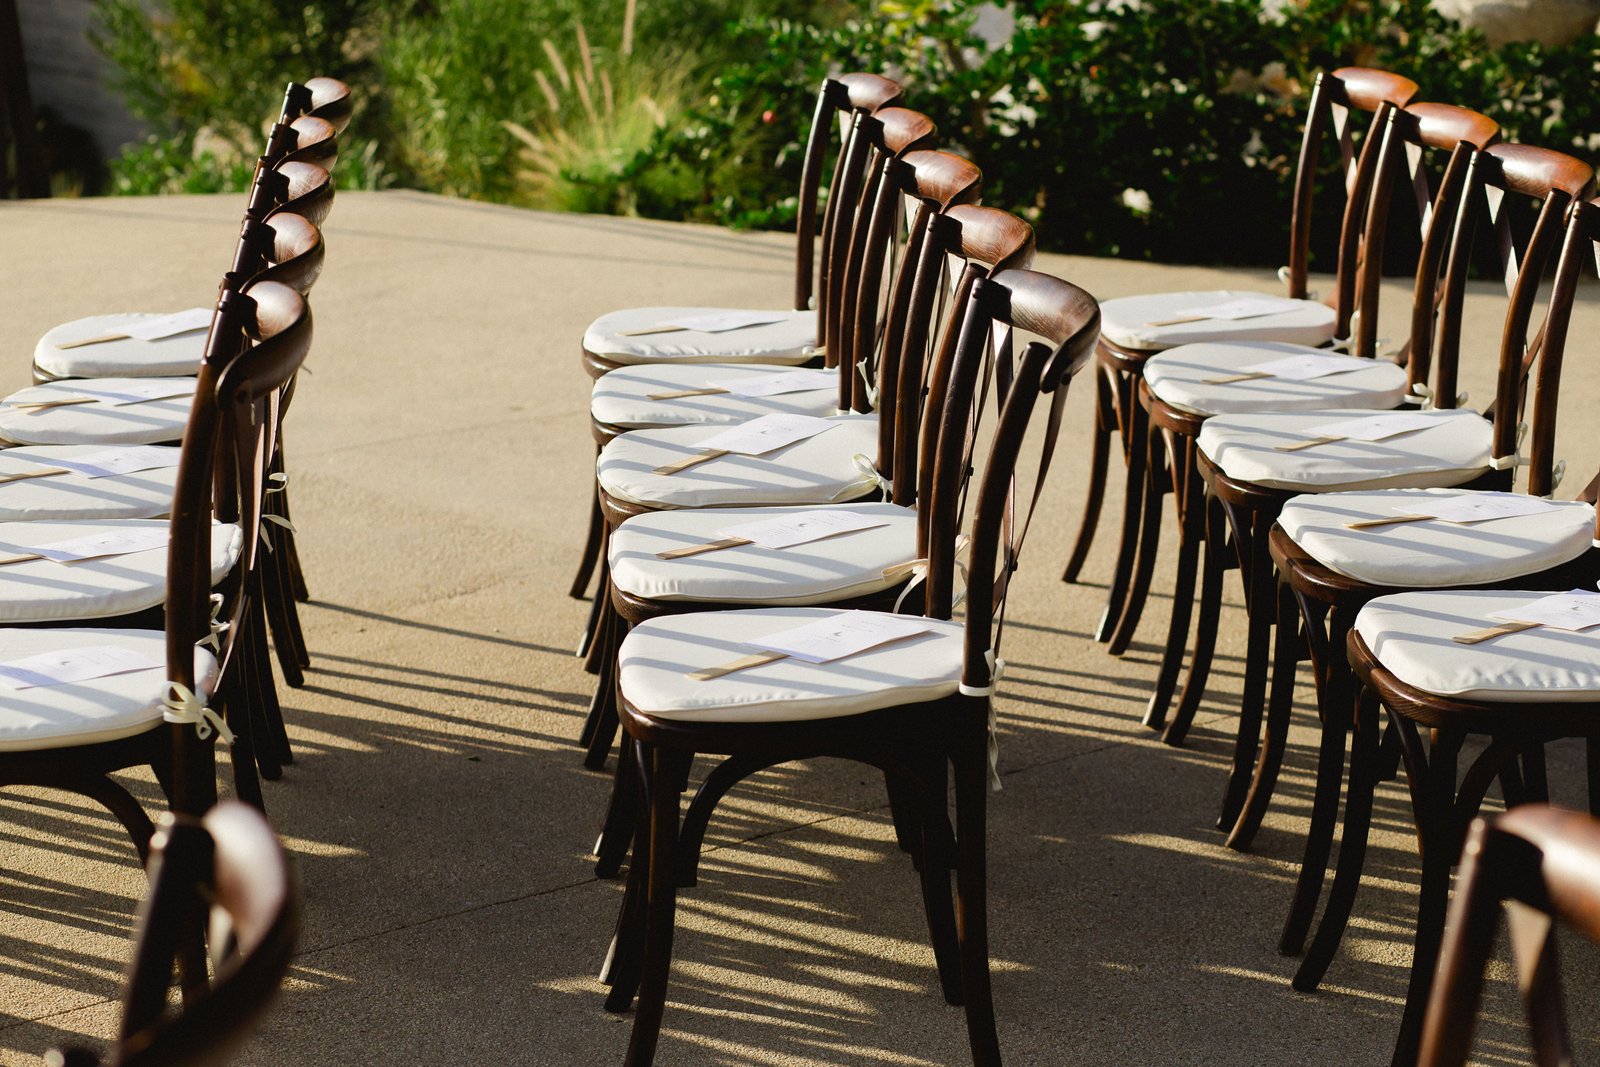 Ceremony Chairs at the Cape in Los Cabos Mexico. This was at Ashley and Matthews Wedding at The Cape. They decided to turn their wedding ceremonies in to a fan, in case their guests got hot, they had something to cool down with